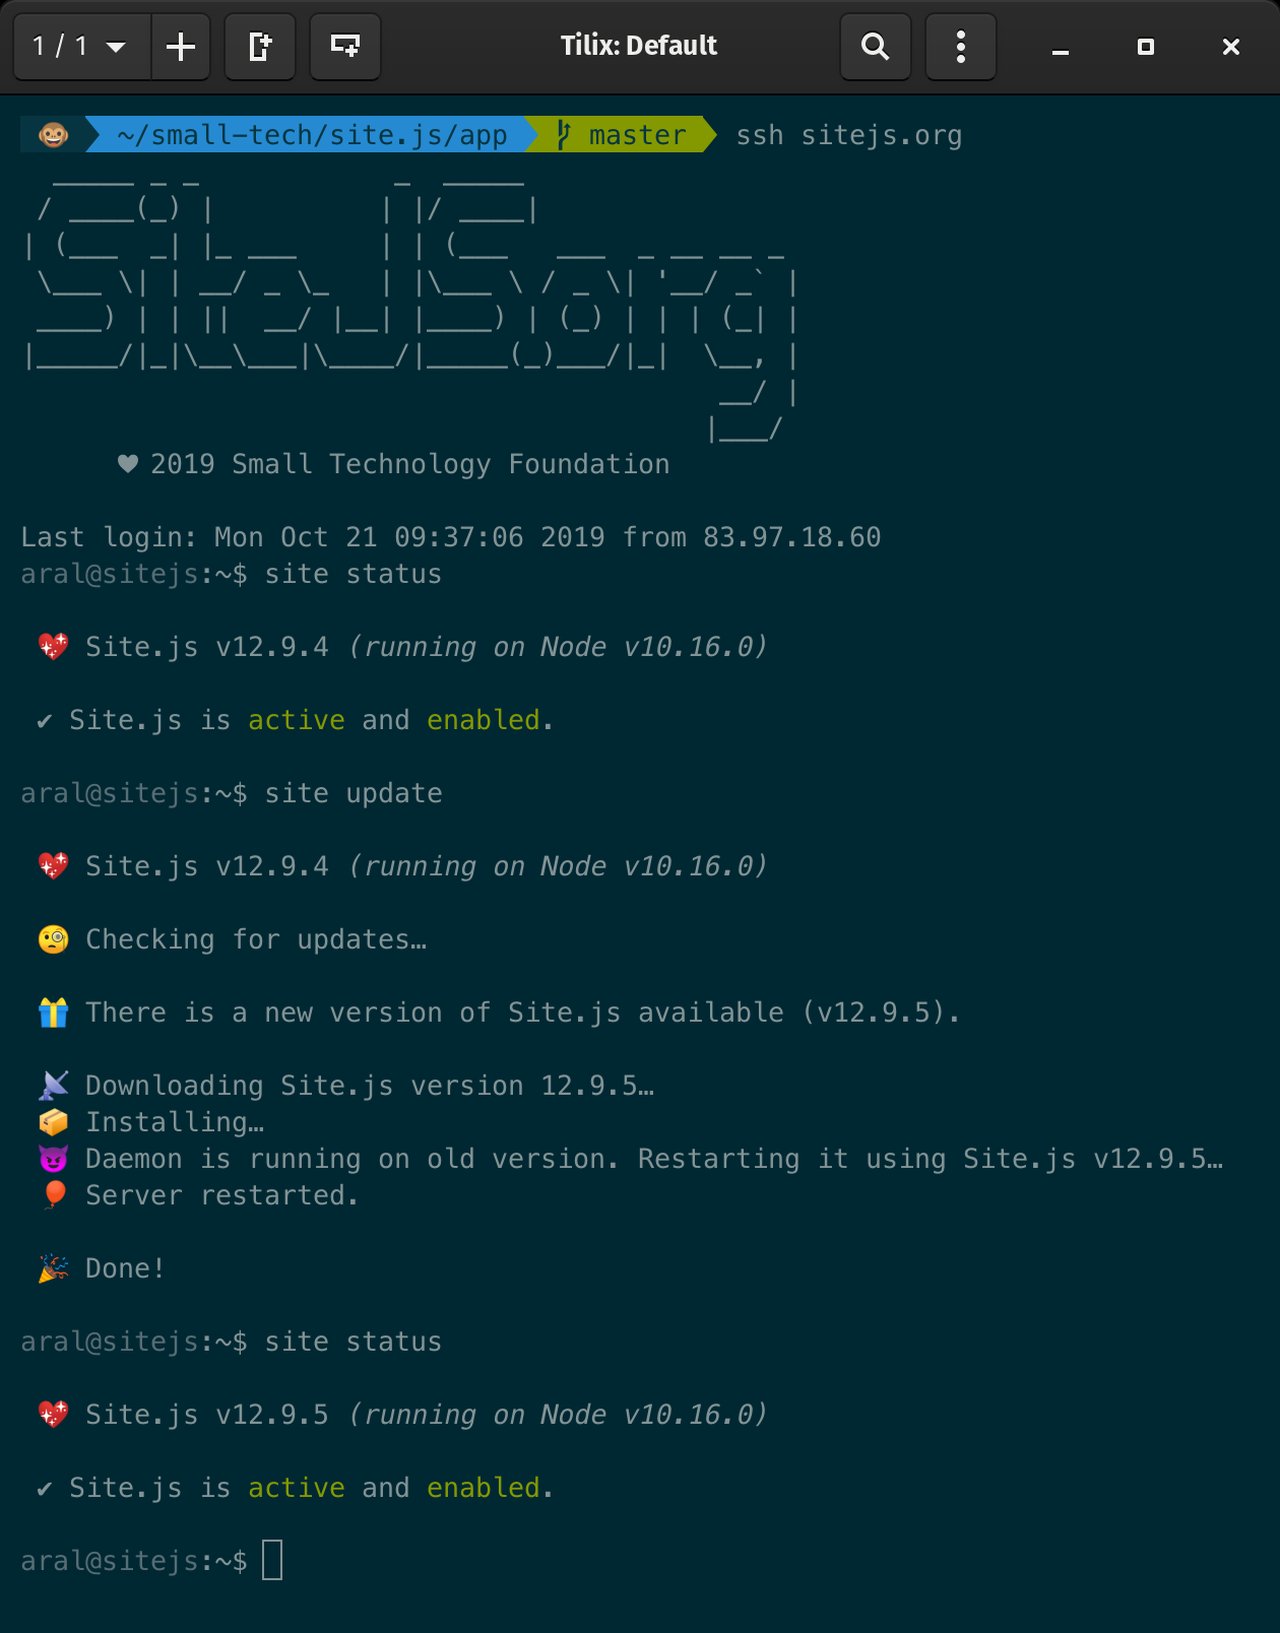 Screenshot of Tilix (terminal app) running on my Linux box. I’ve ssh’ed into the server that runs sitejs.org and run the new update command. The output shows that the server was seamlessly updated and restarted.